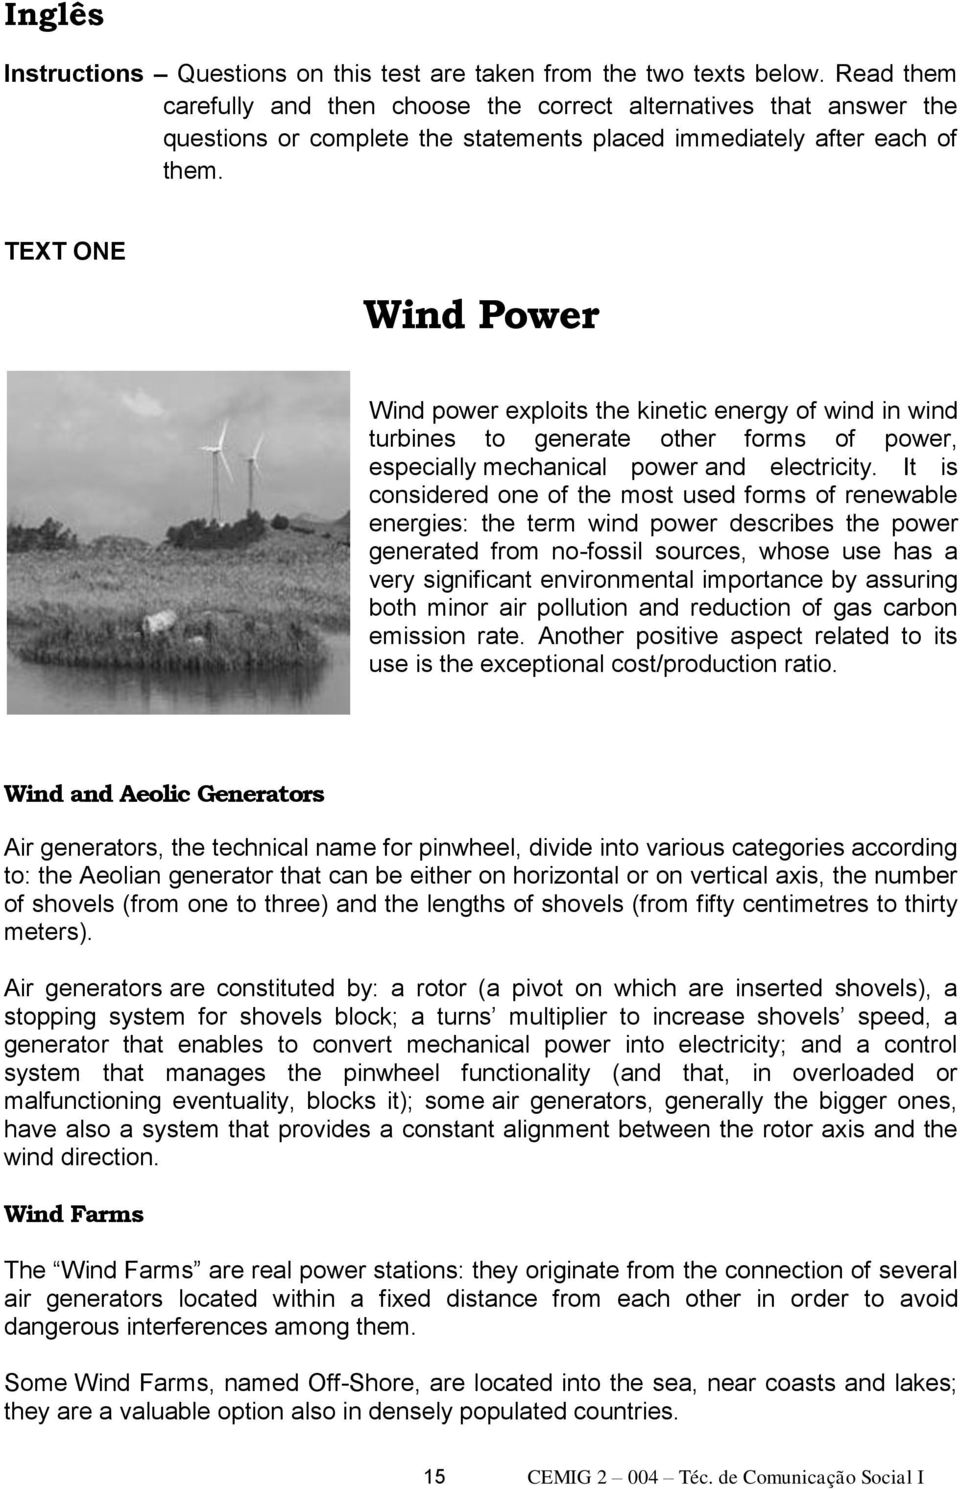 TEXT ONE Wind Power Wind power exploits the kinetic energy of wind in wind turbines to generate other forms of power, especially mechanical power and electricity.